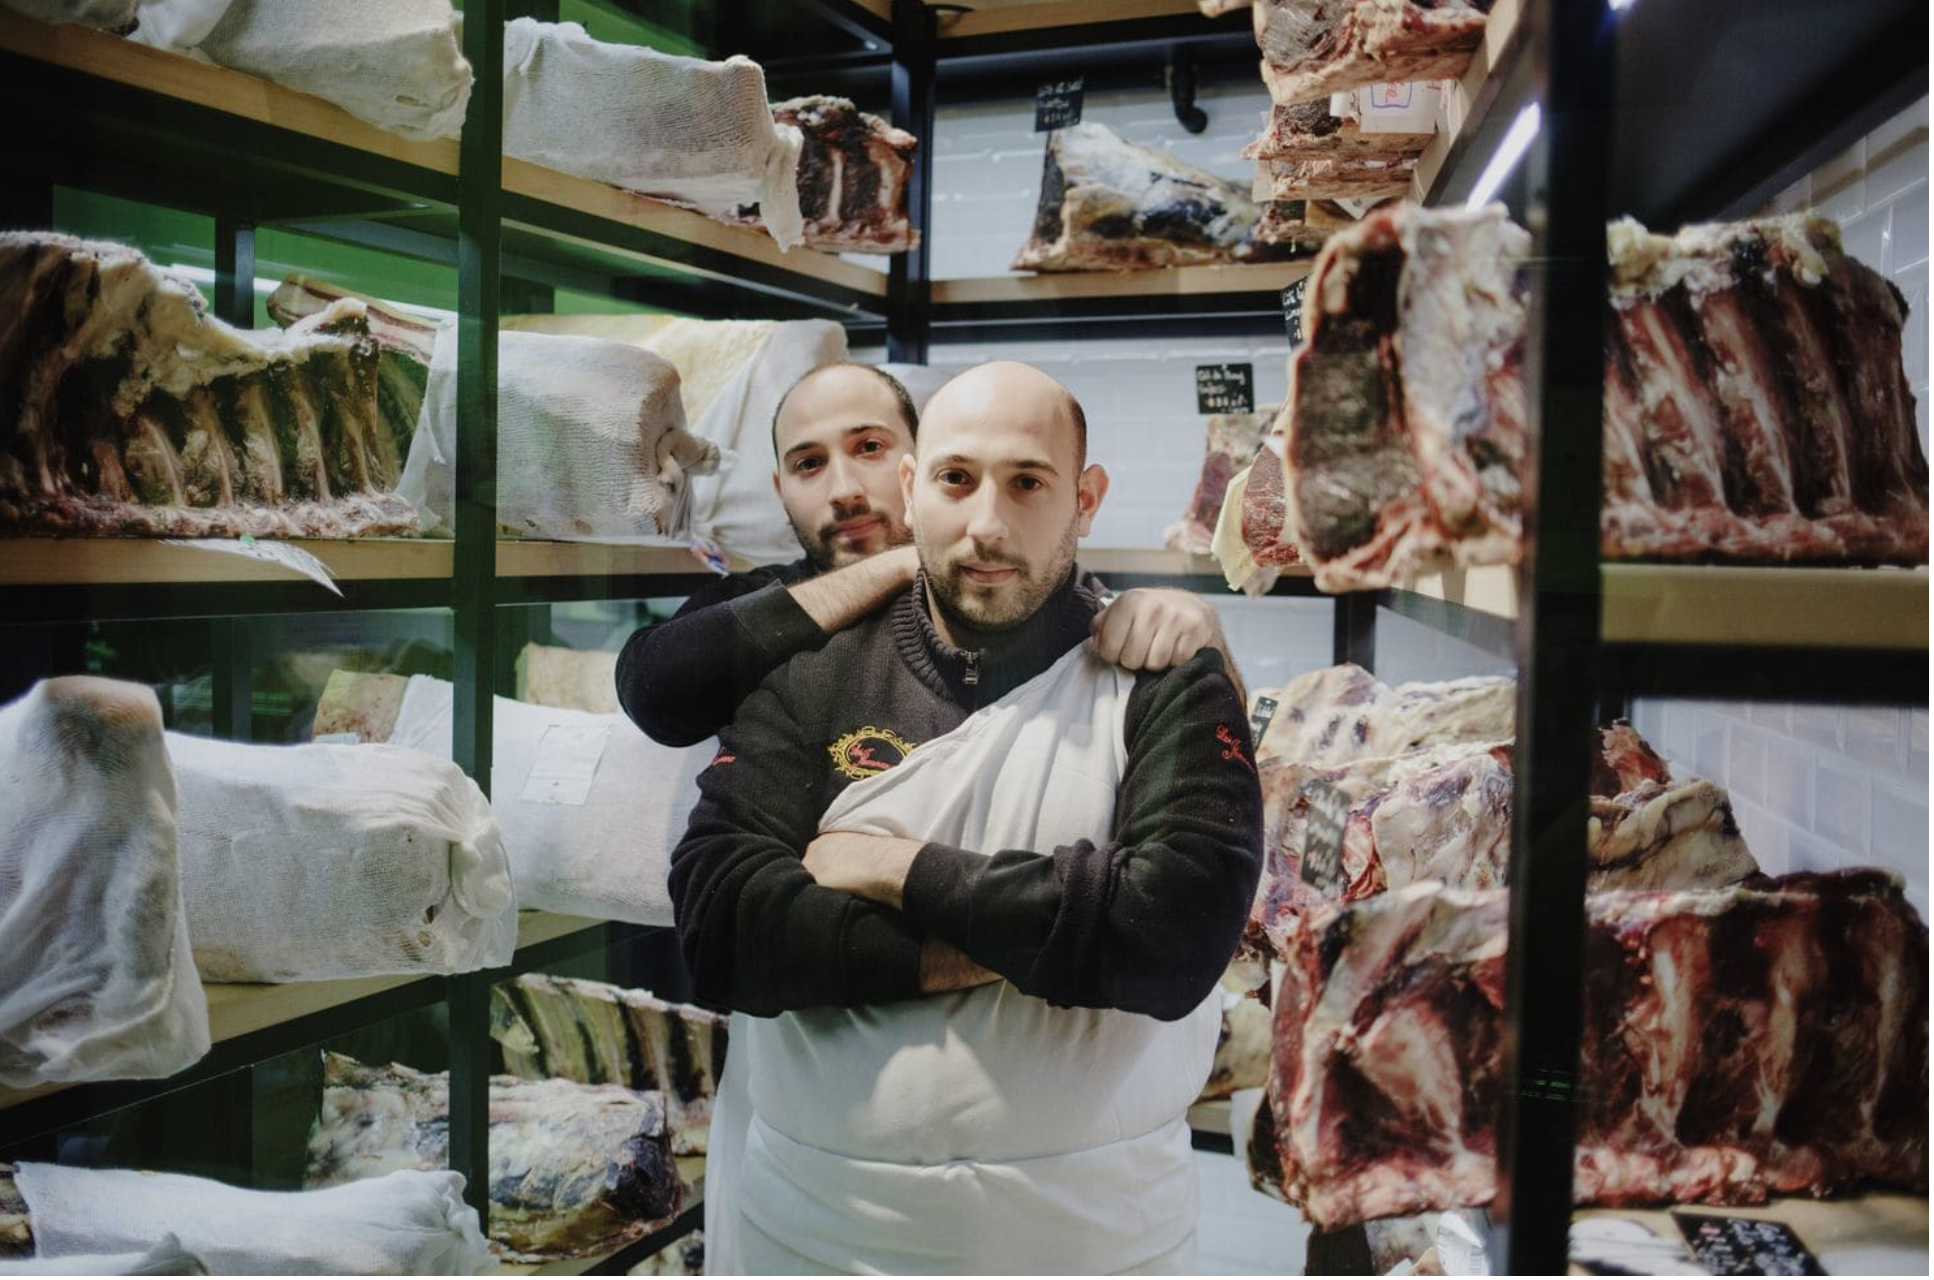 Why halal meat generates so much controversy in Europe